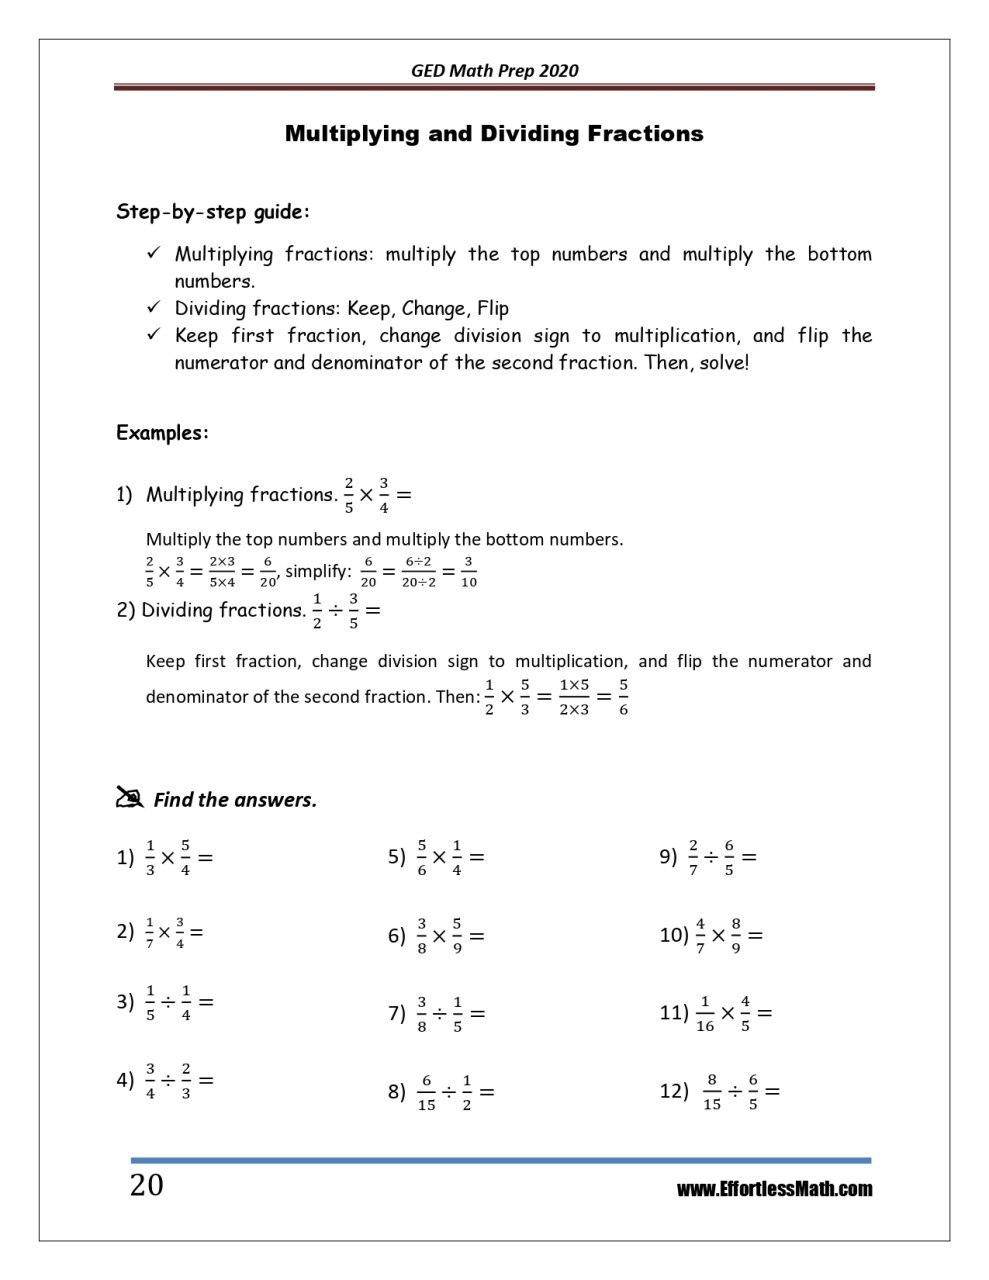 ged practice test math questions